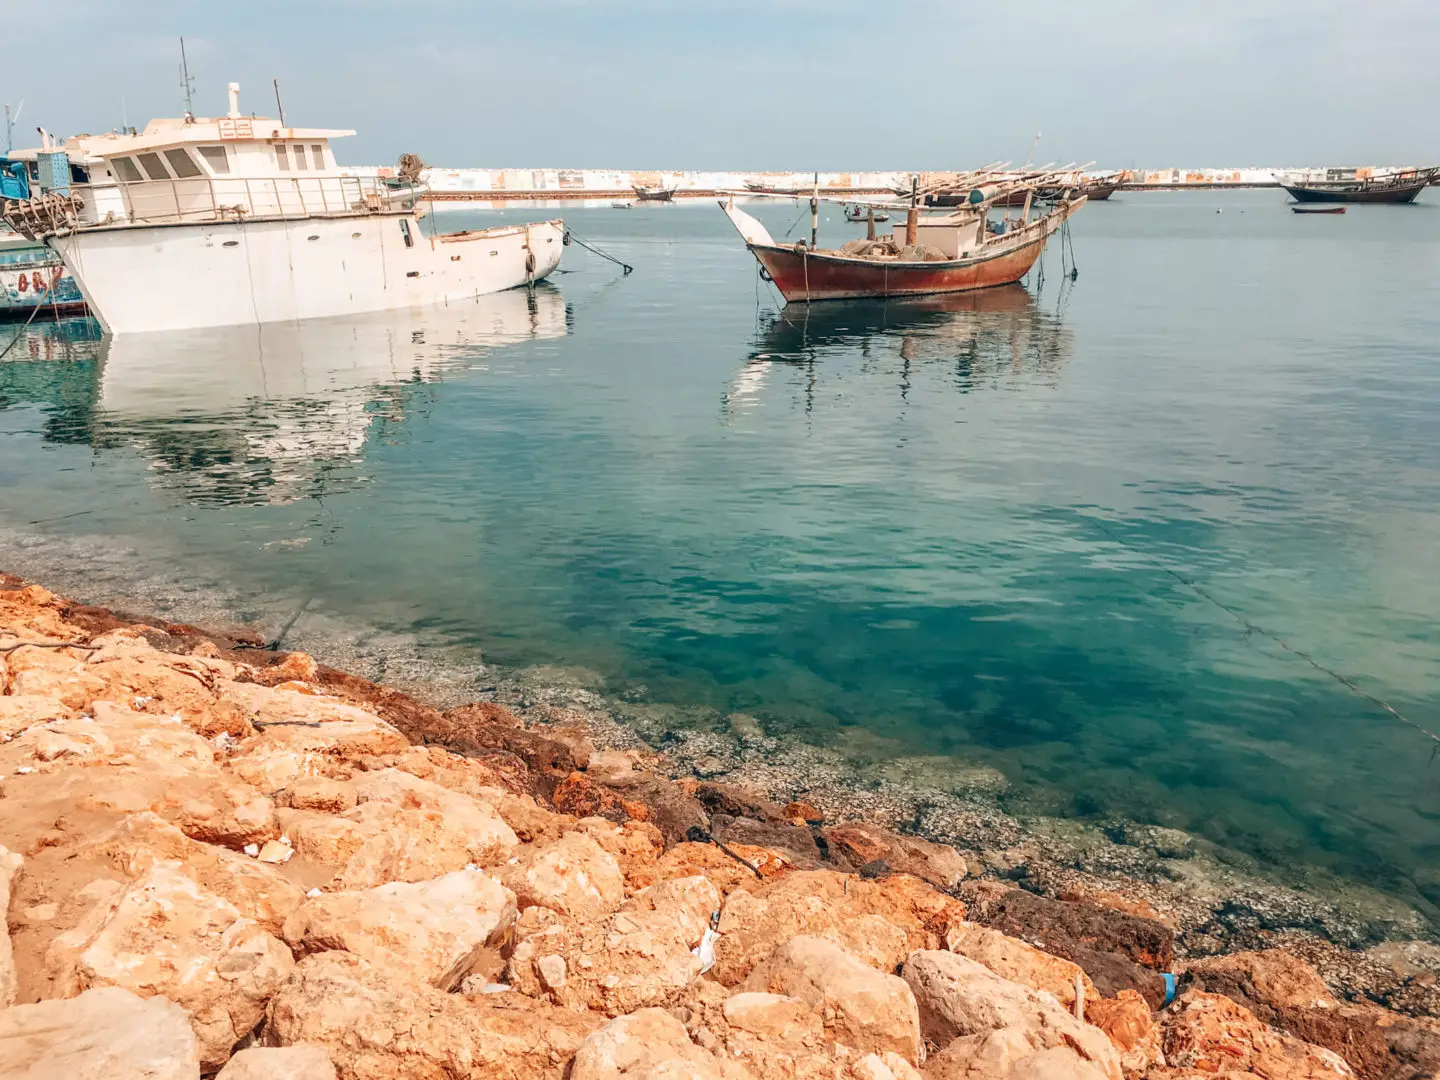 Boats in the coastal town of Sur in Oman